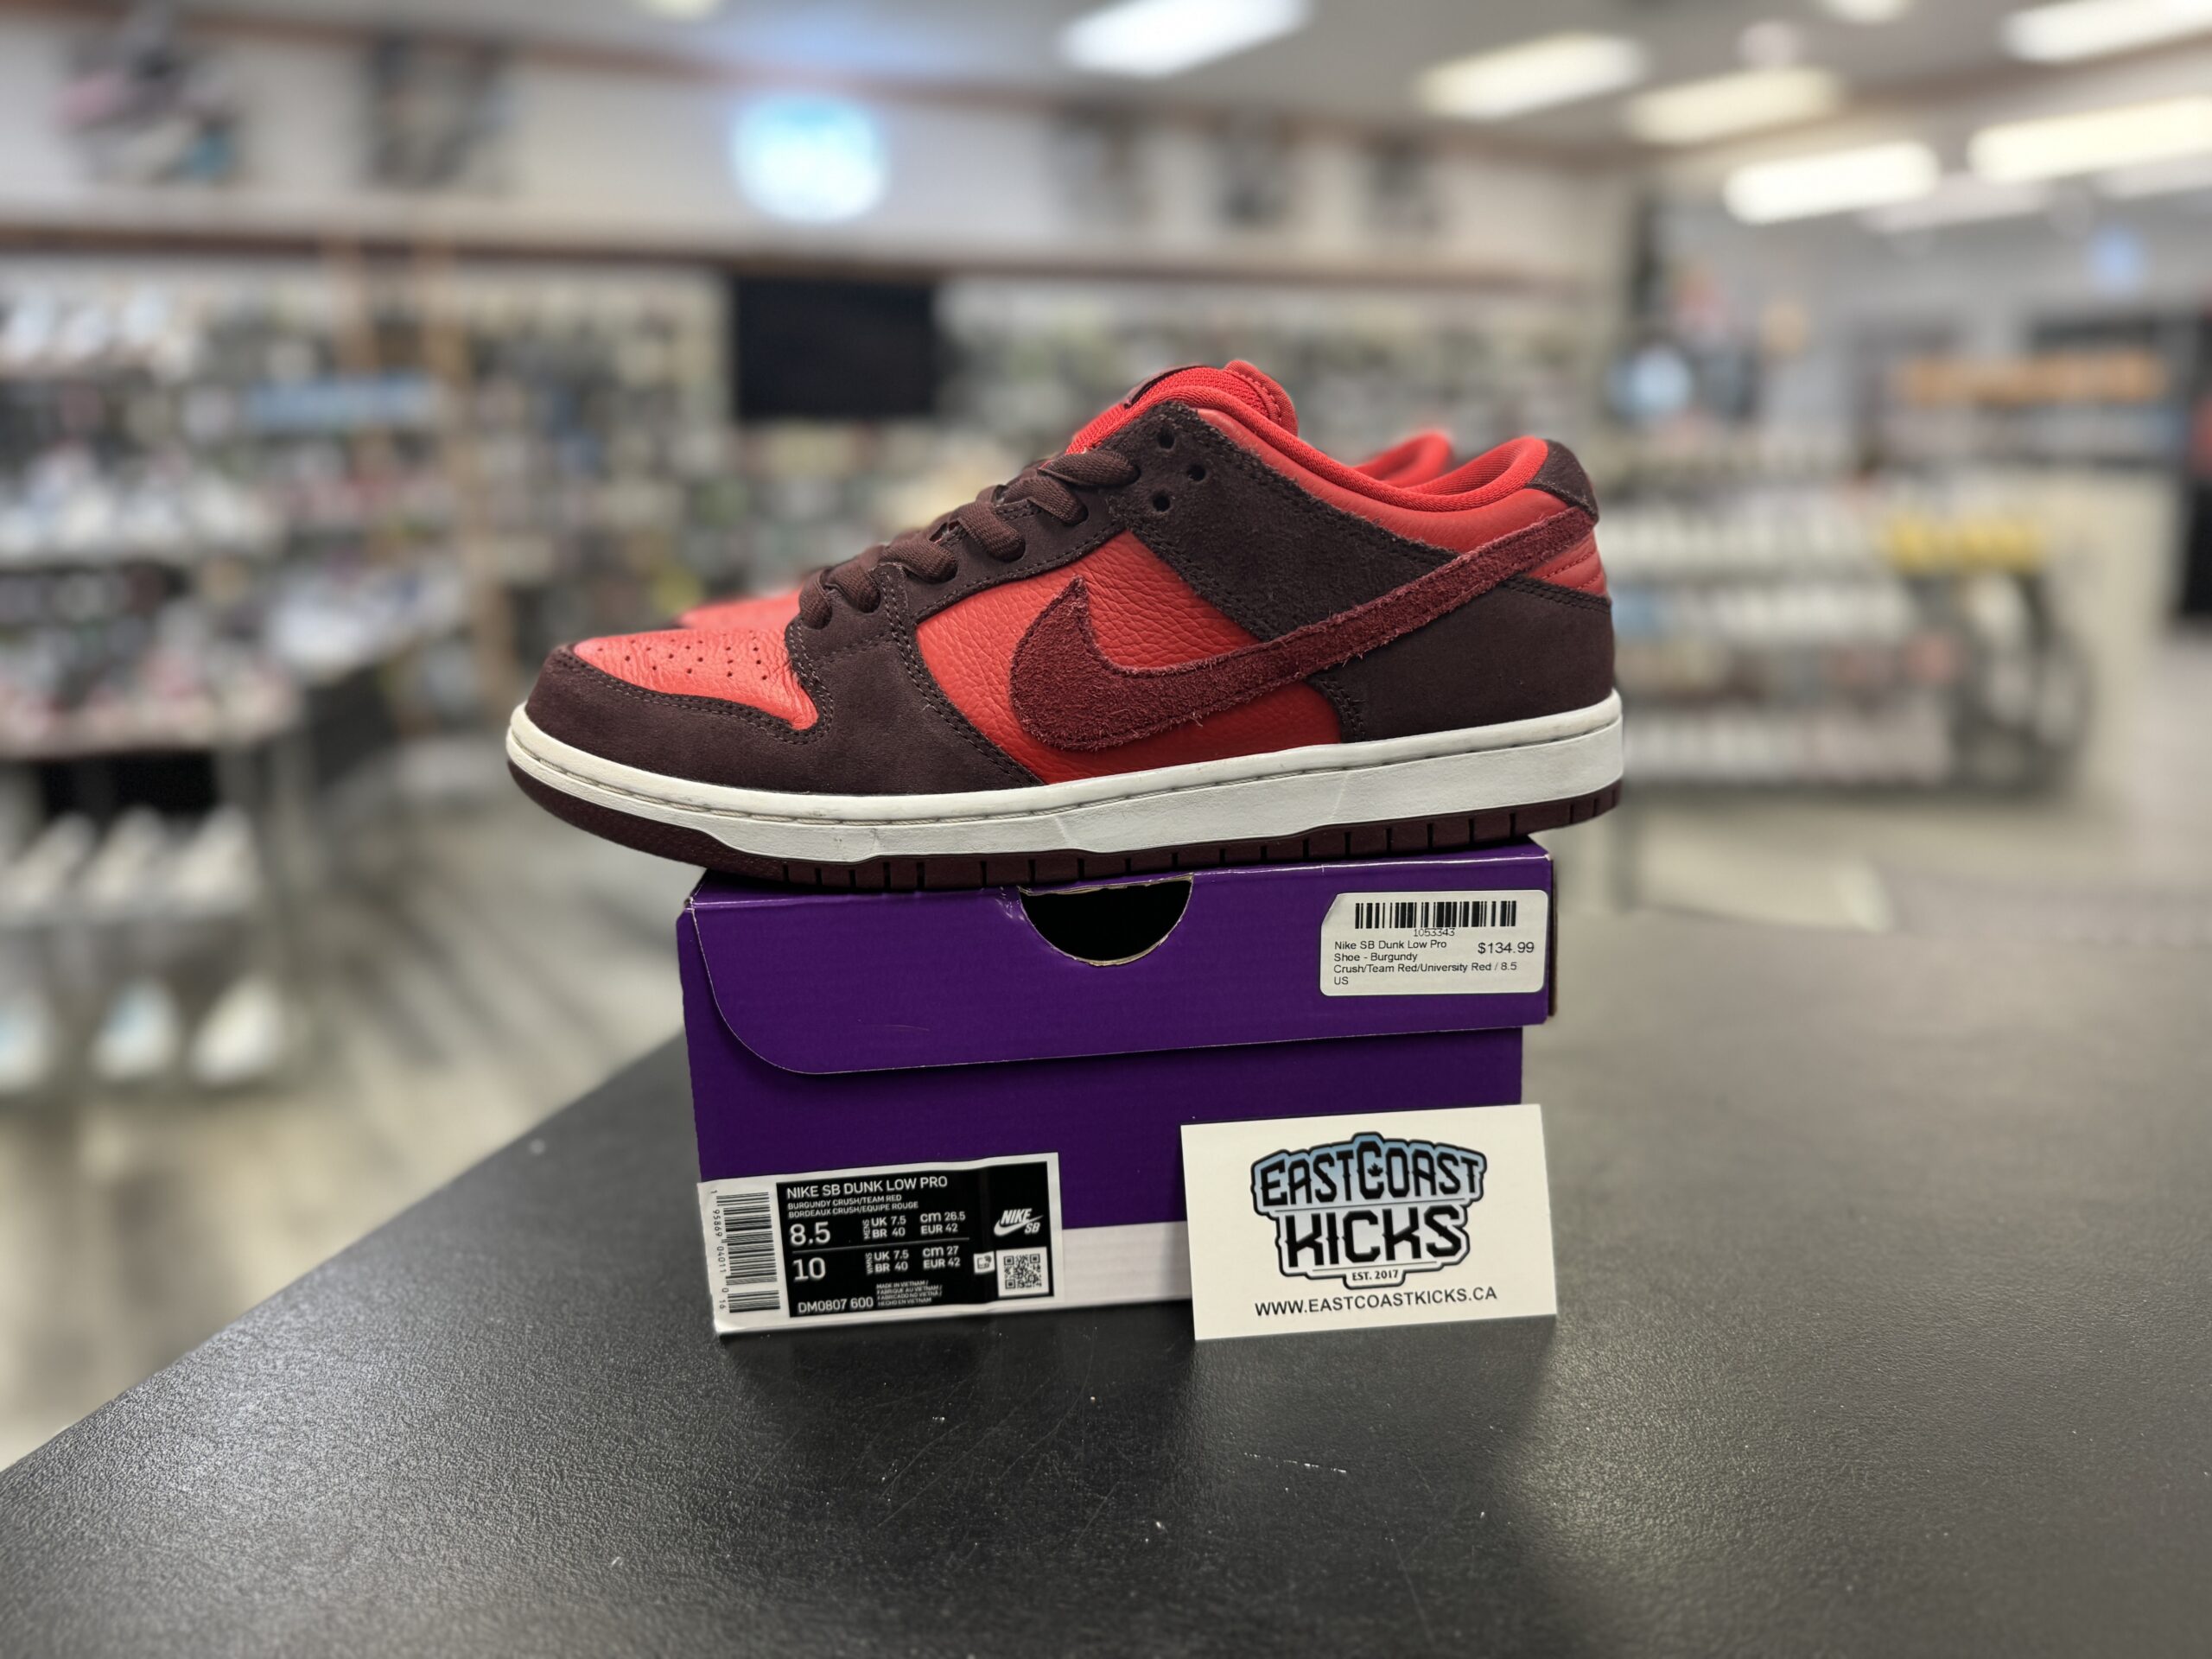 Preowned Nike SB Dunk Low Cherry Size 8.5